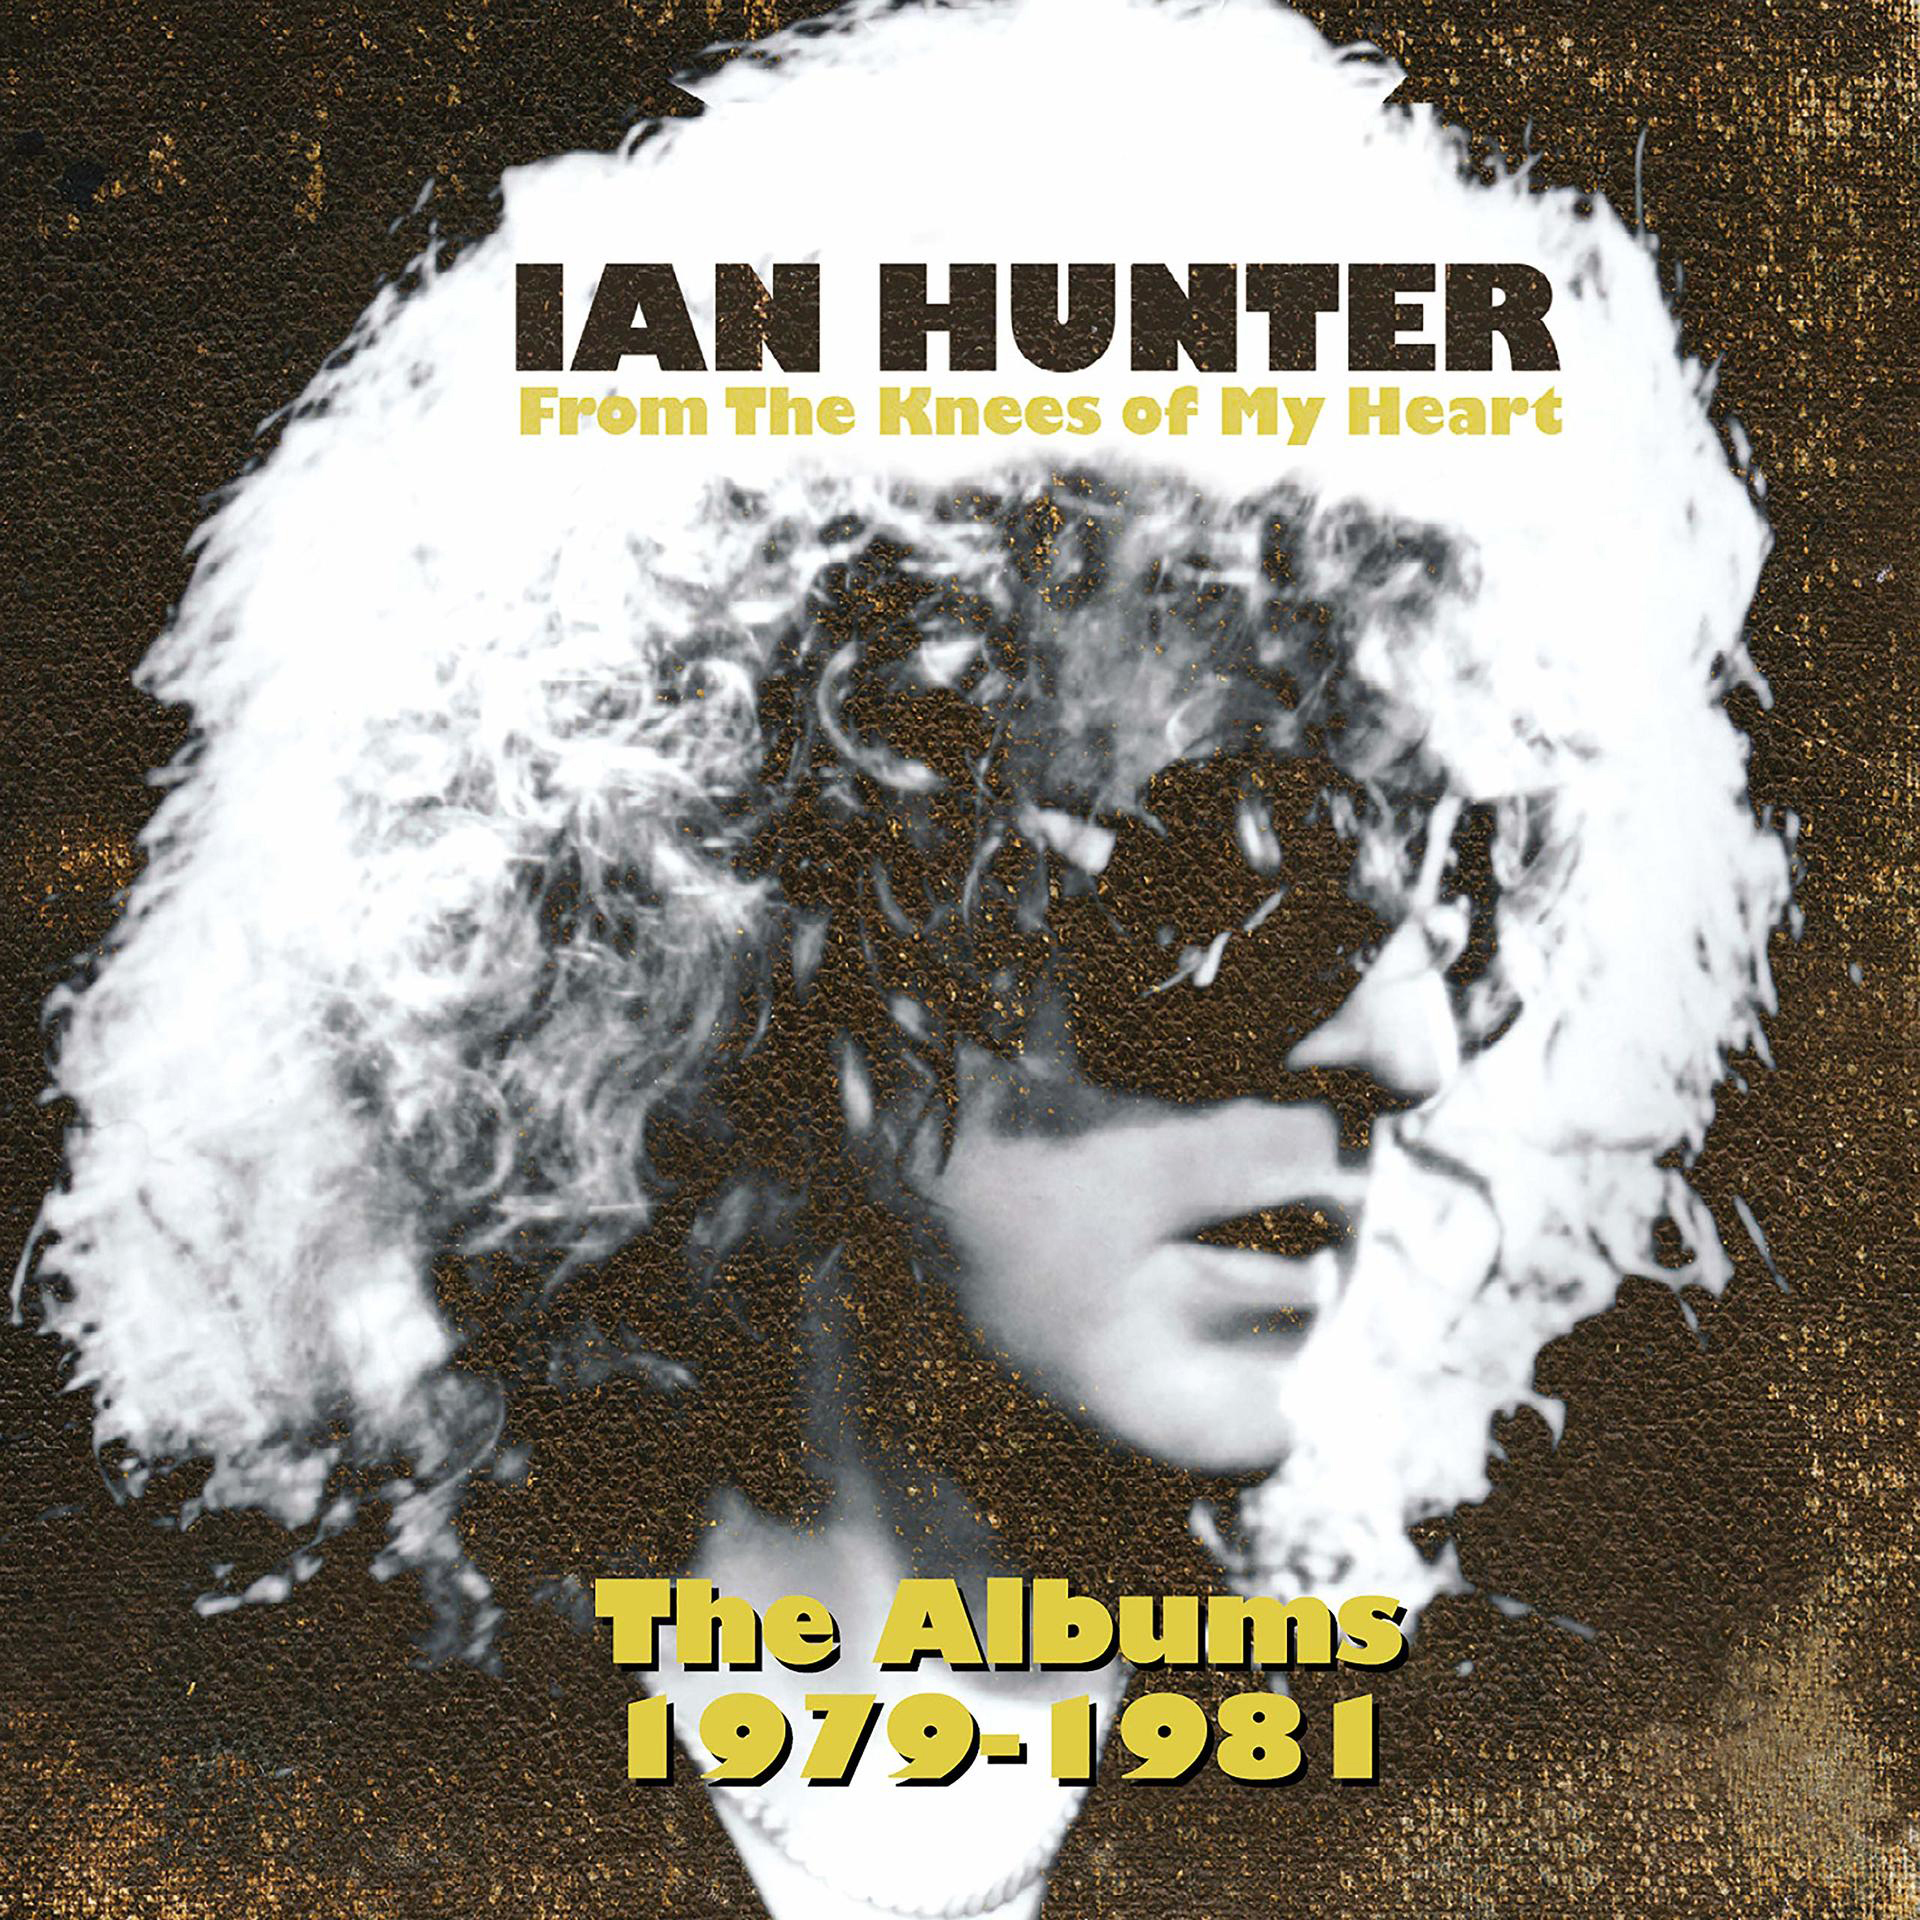 Ian Hunter - From Of Knees 1979-1981) Albums (The My (CD) The Heart 